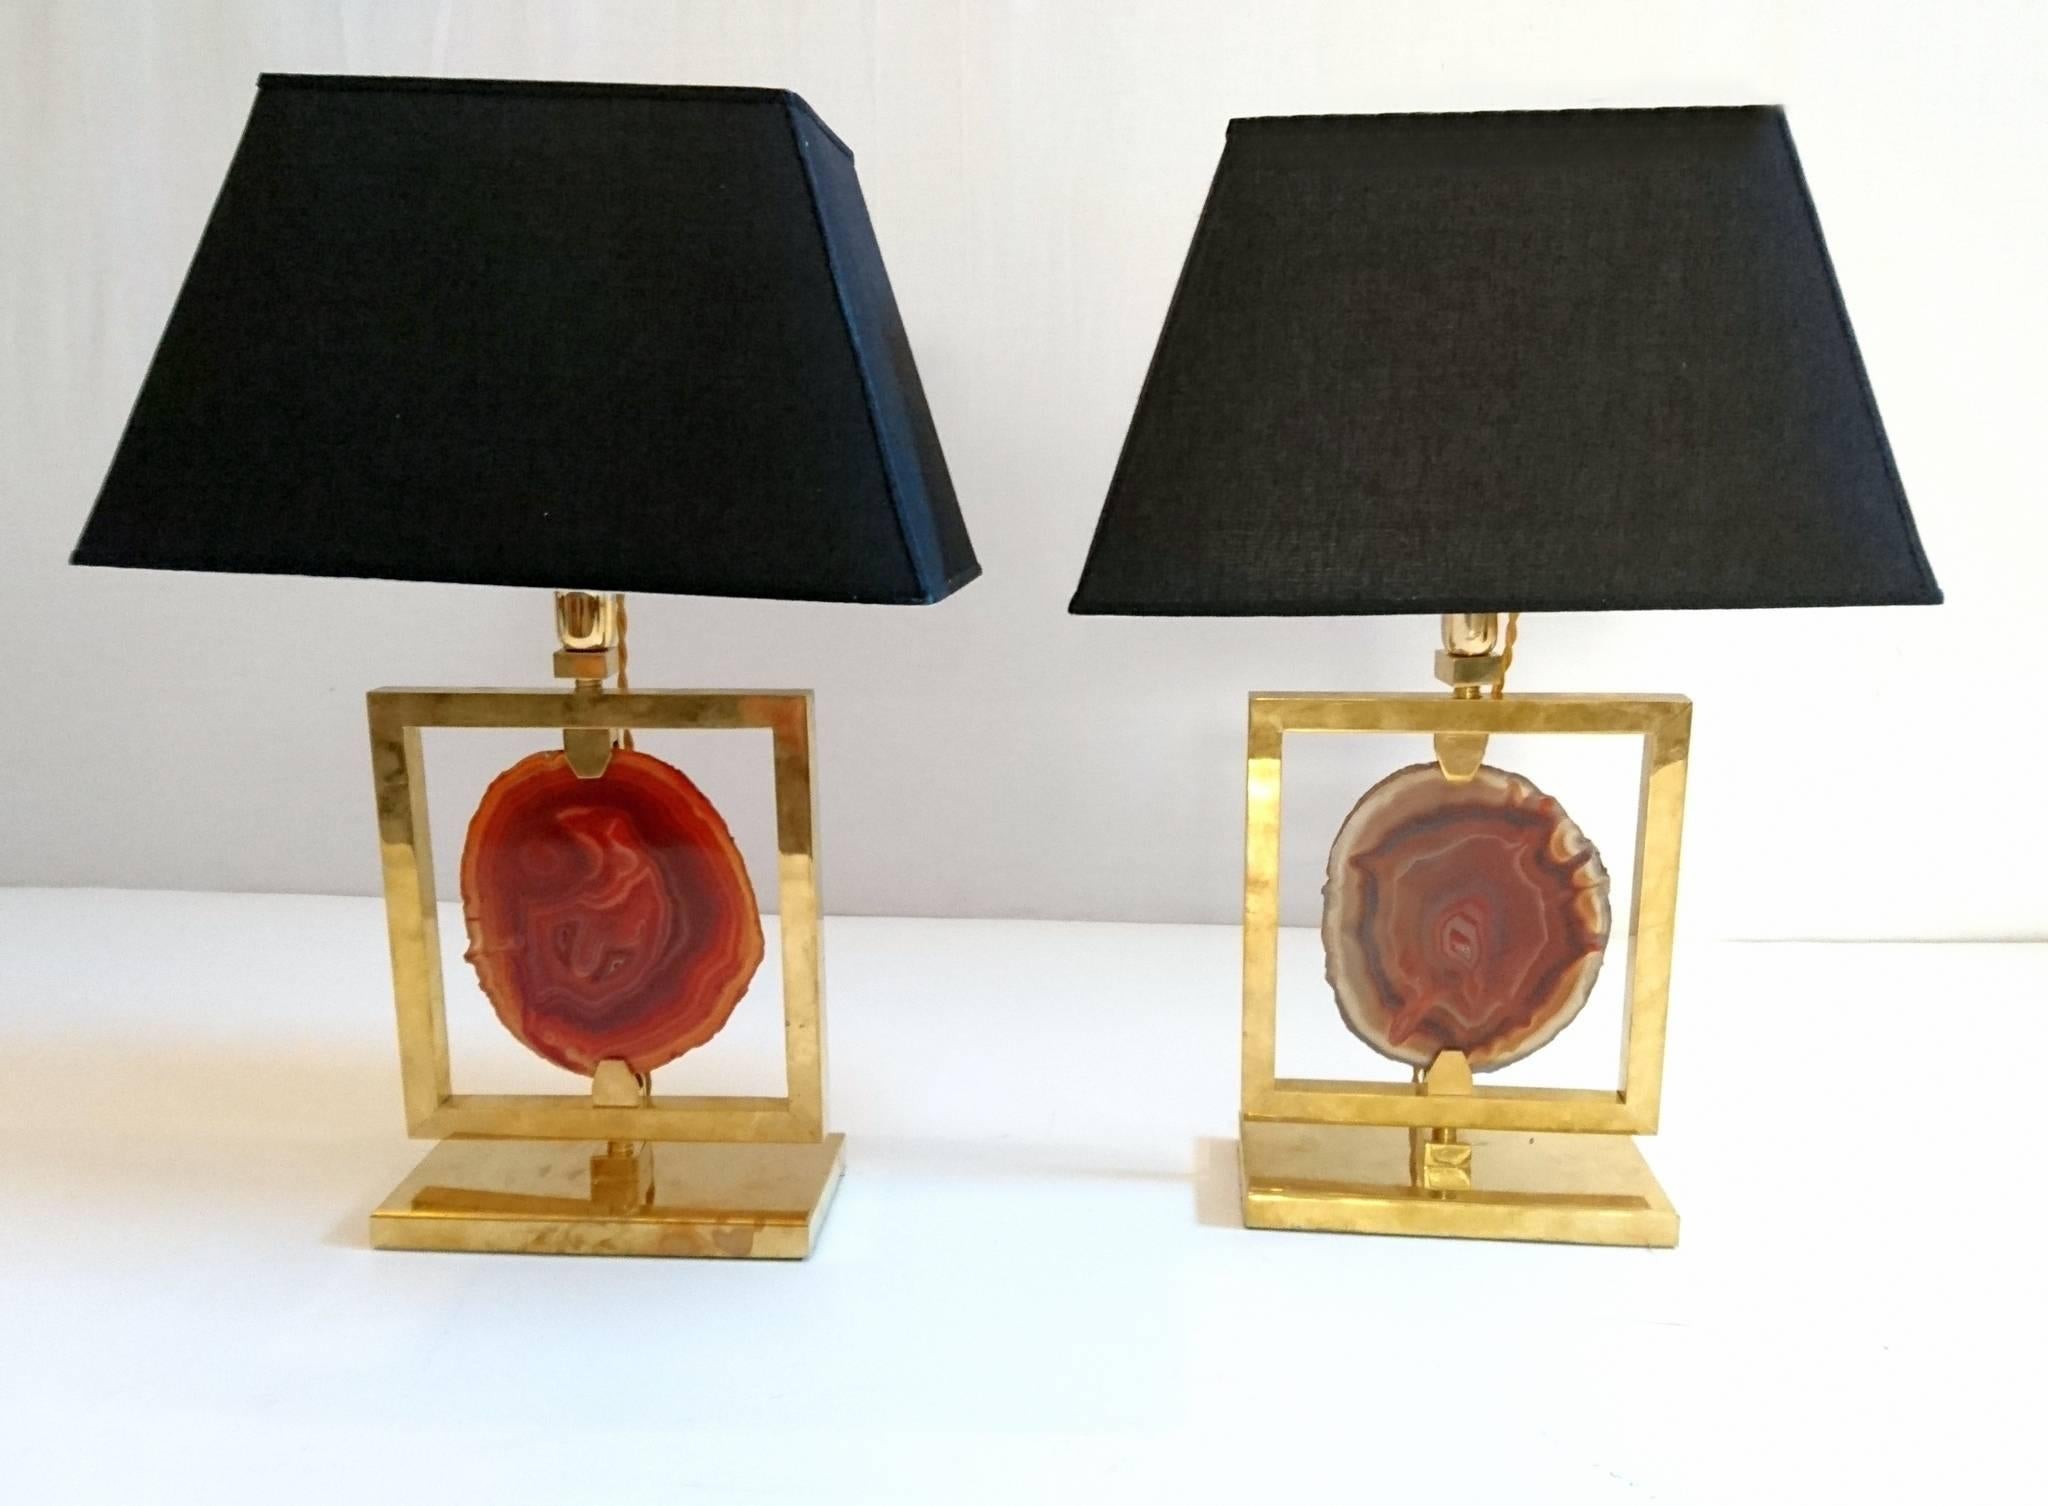 Pair of exquisite lamps in brass with agate slices in the centre. The lamps can be had with either the original angular lampshade or ne cylindrical black shades. Dimensions given are with the angular shades. The diameter of the round one is 35 cm.